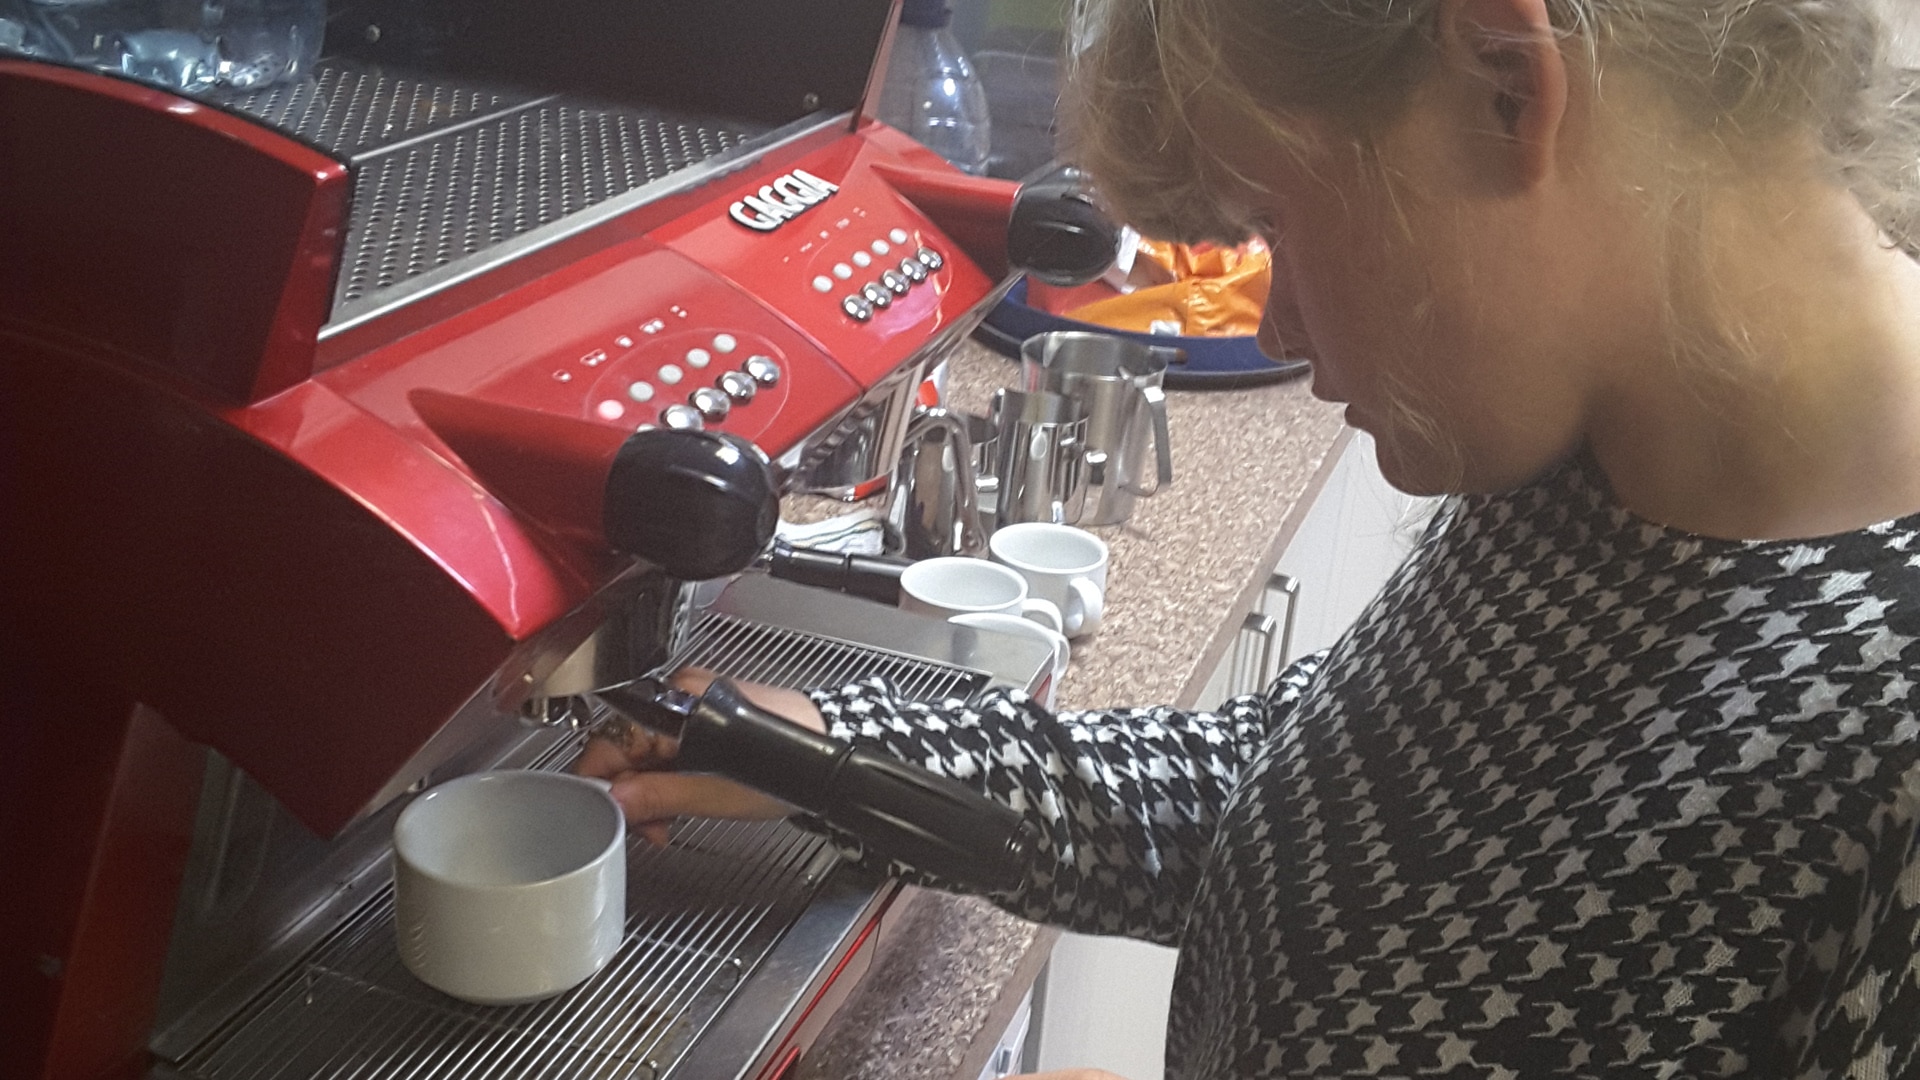 Magpies member using a coffee machine